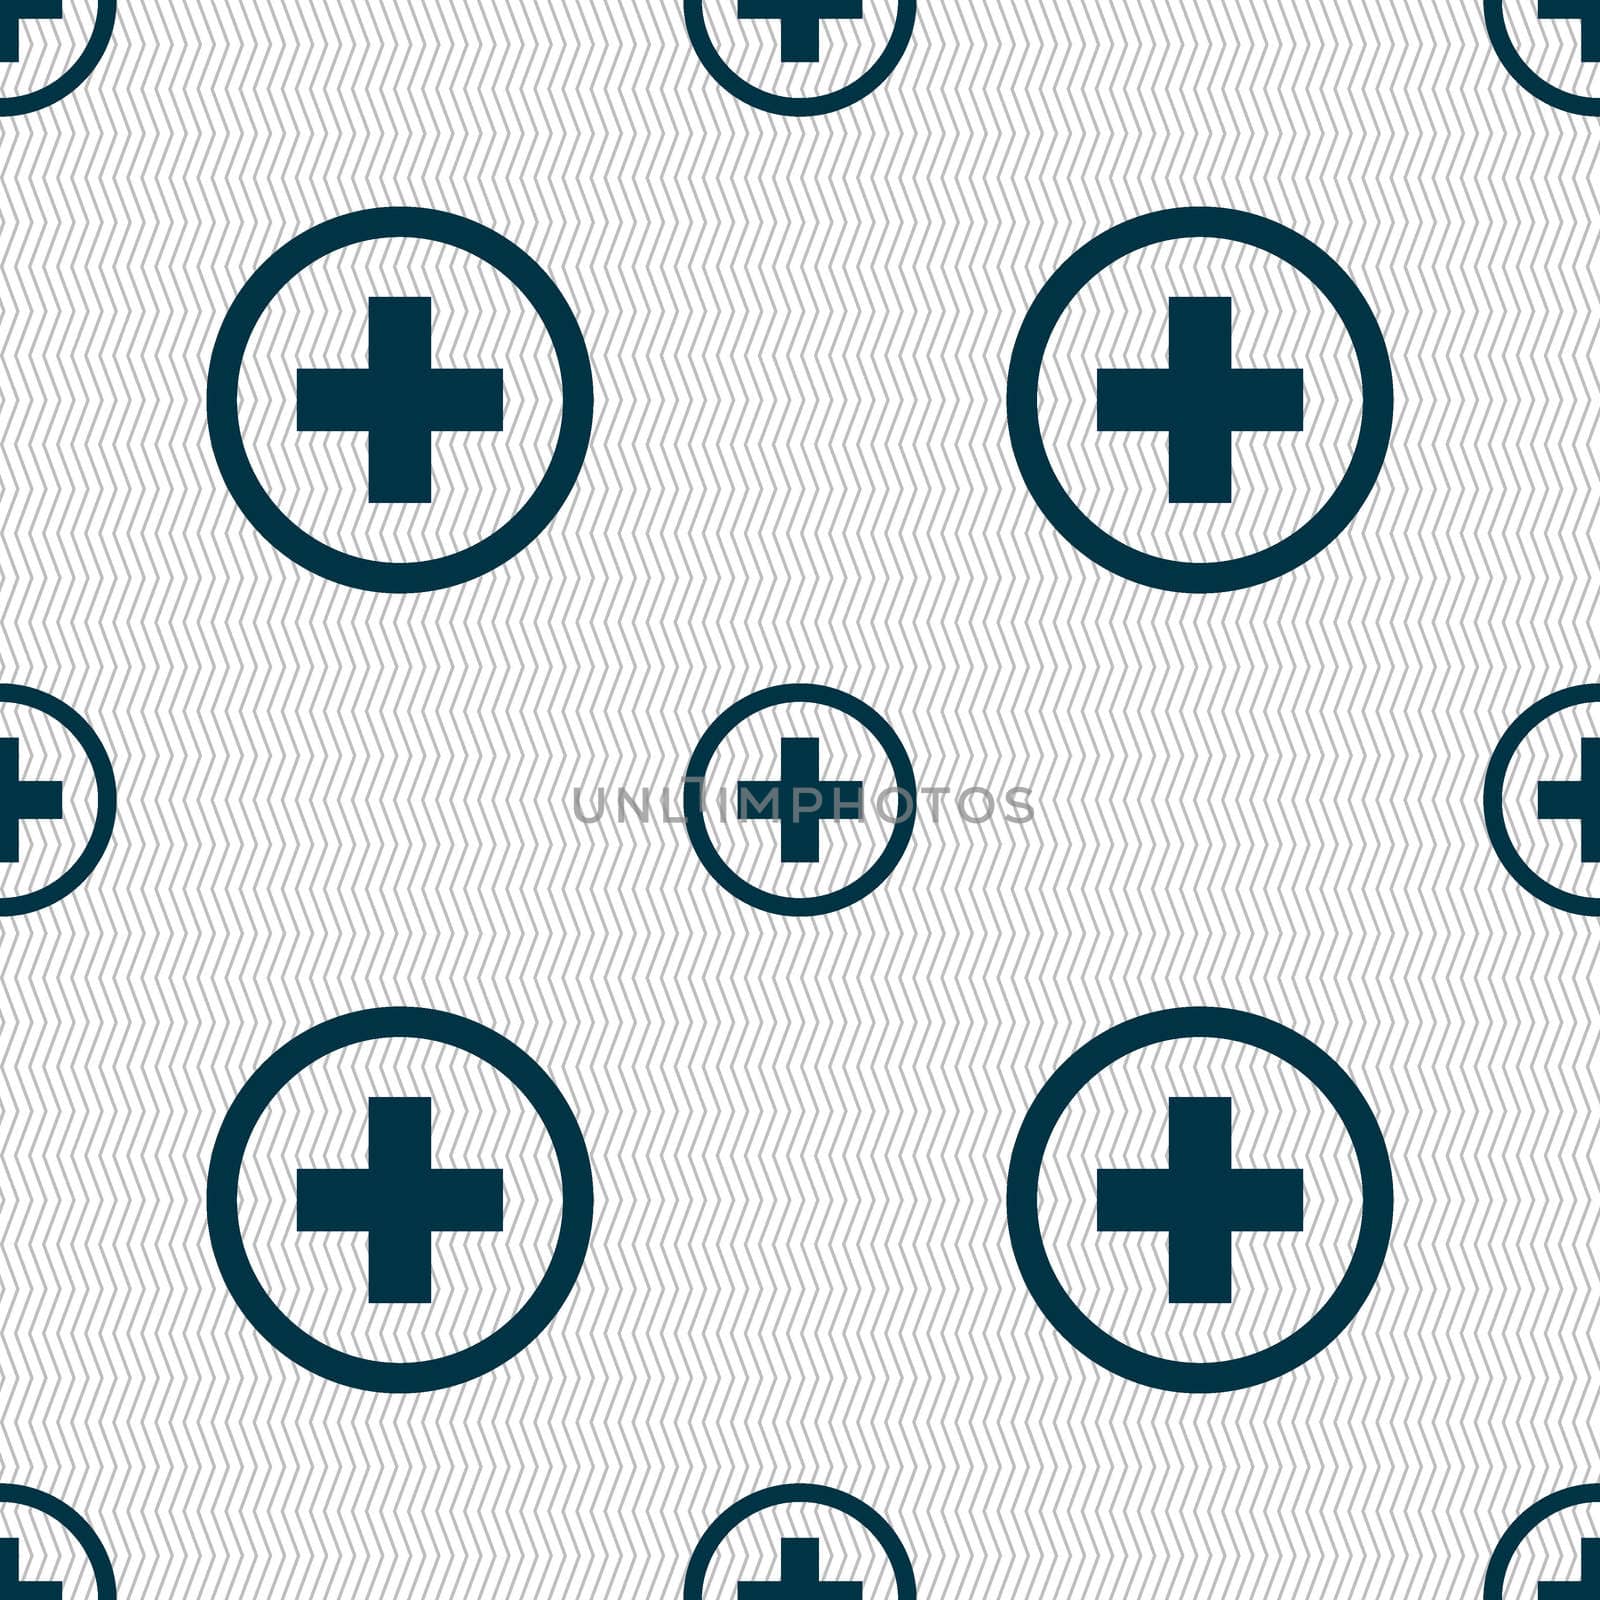 Plus sign icon. Positive symbol. Zoom in. Seamless abstract background with geometric shapes. illustration